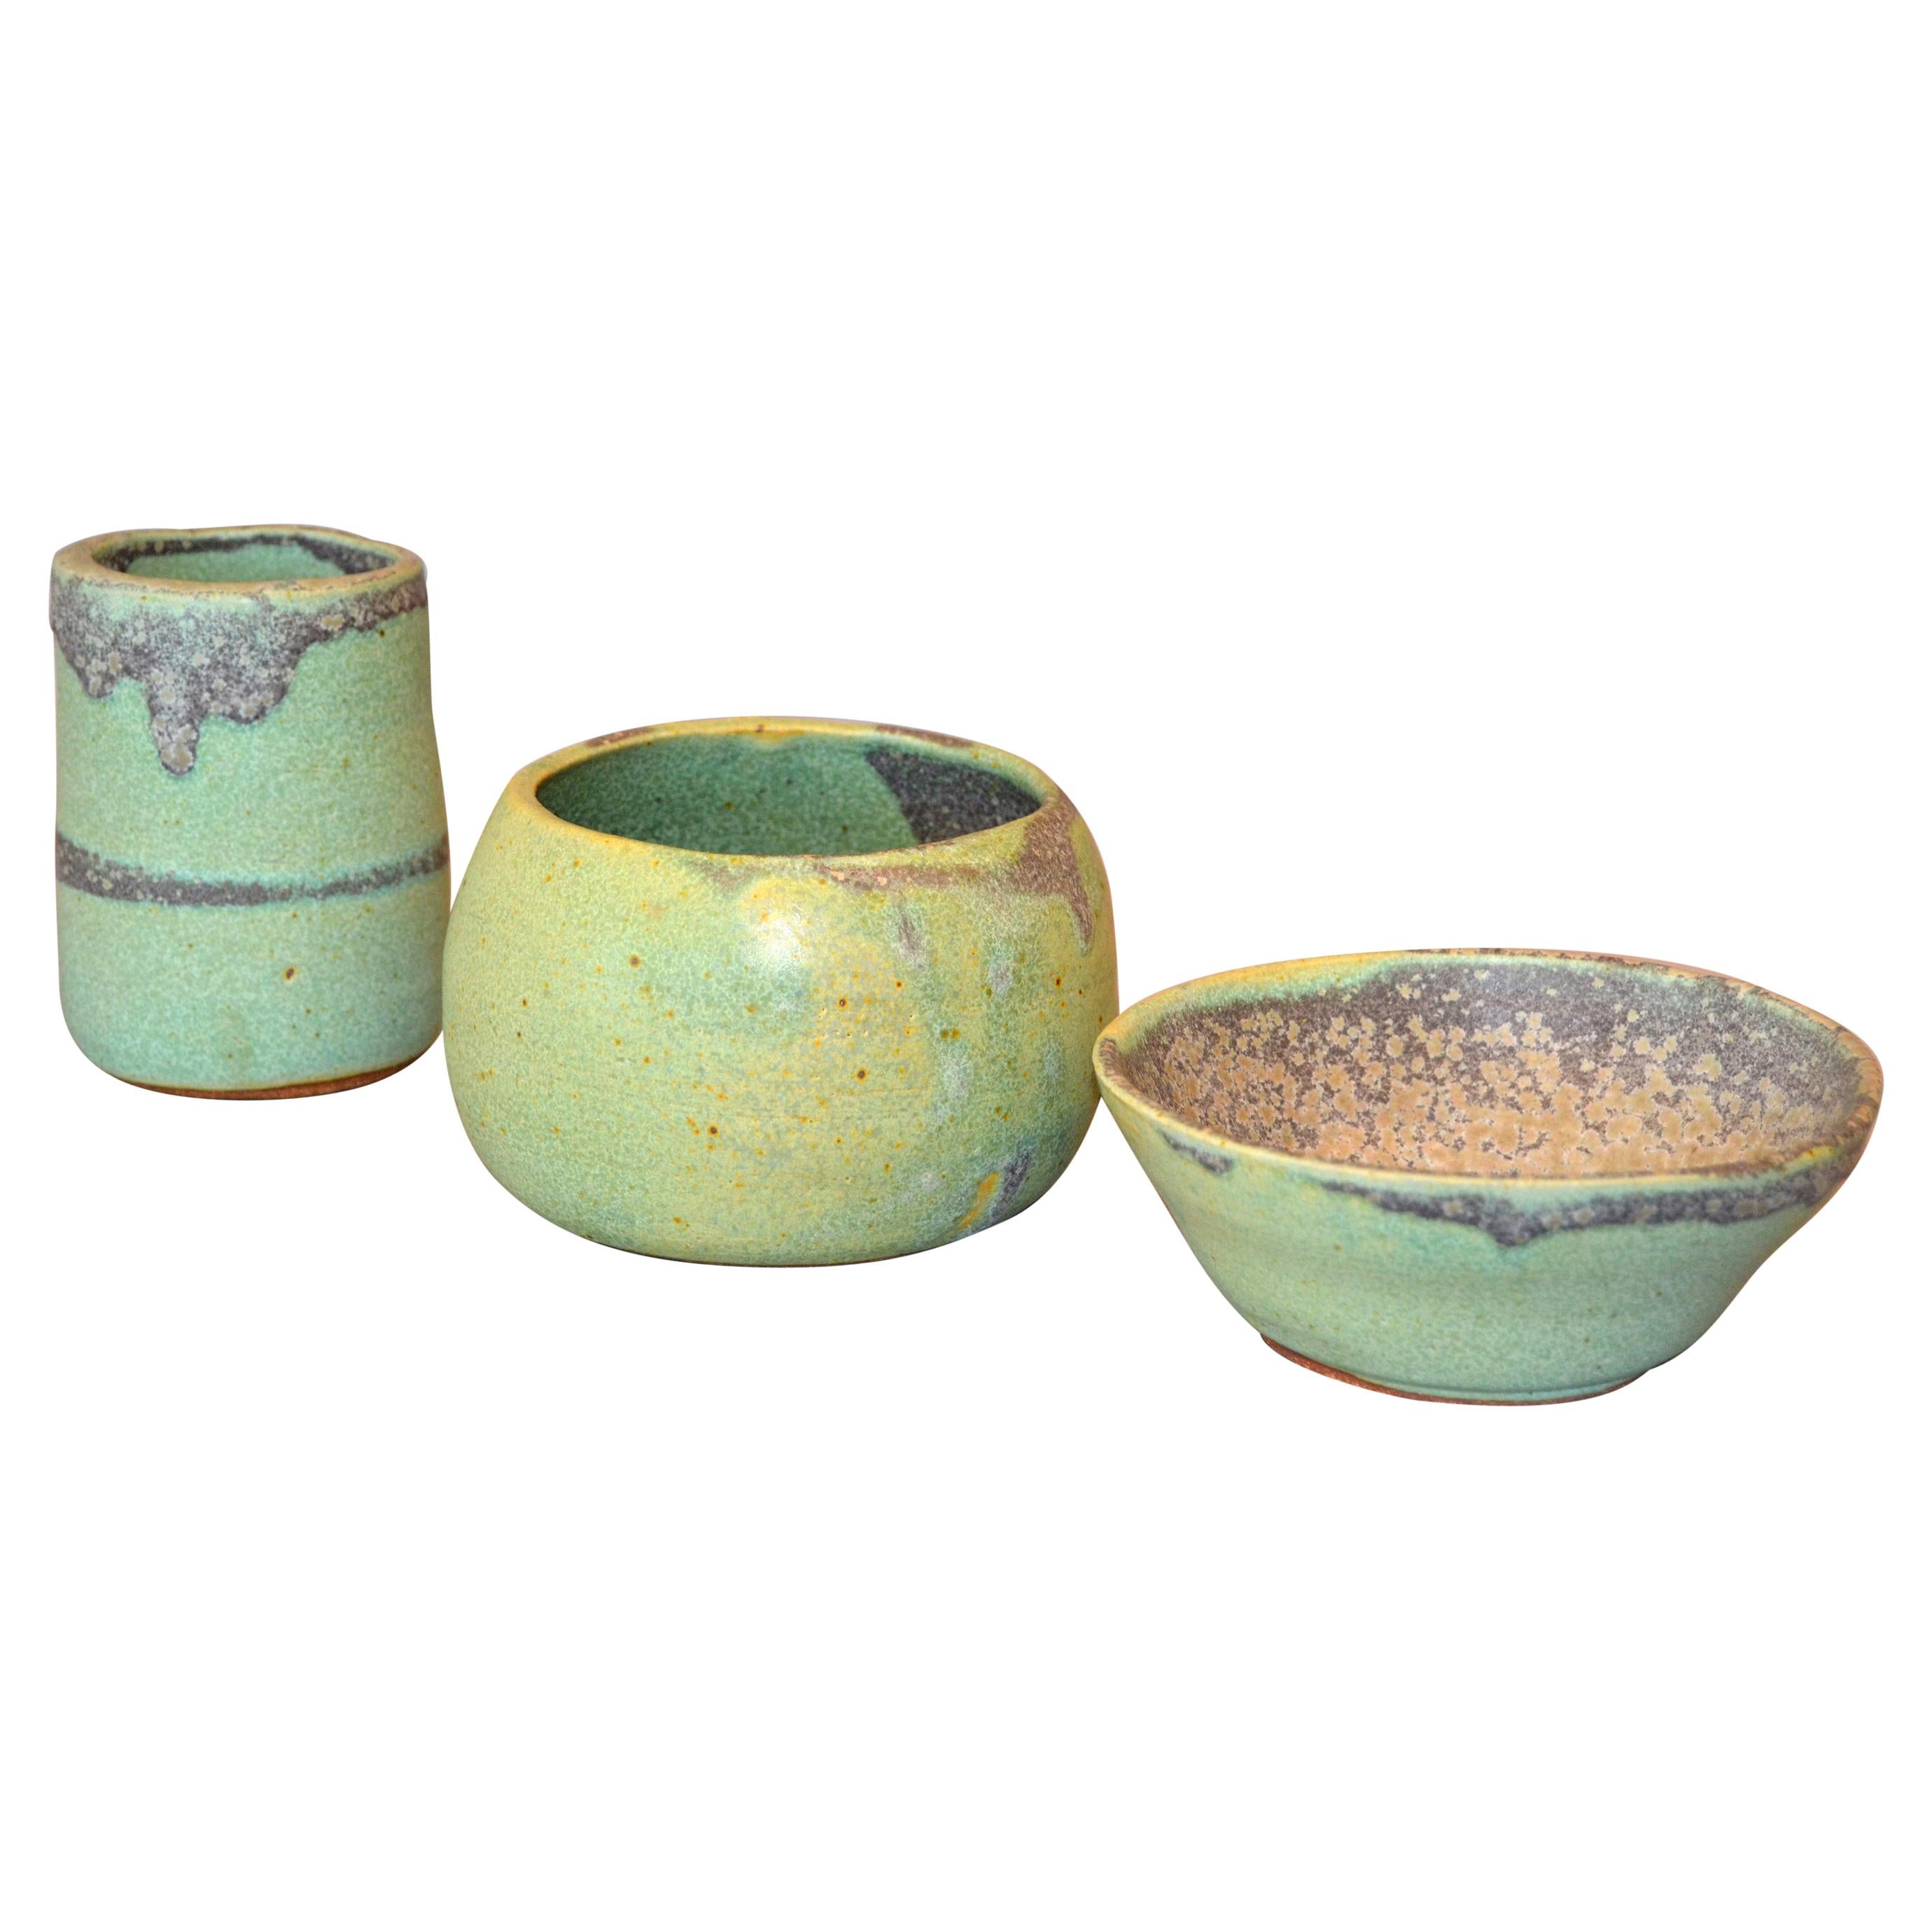 Vintage Handcrafted Aztec Green and Gray Pottery Bowls or Vessel Set of 3